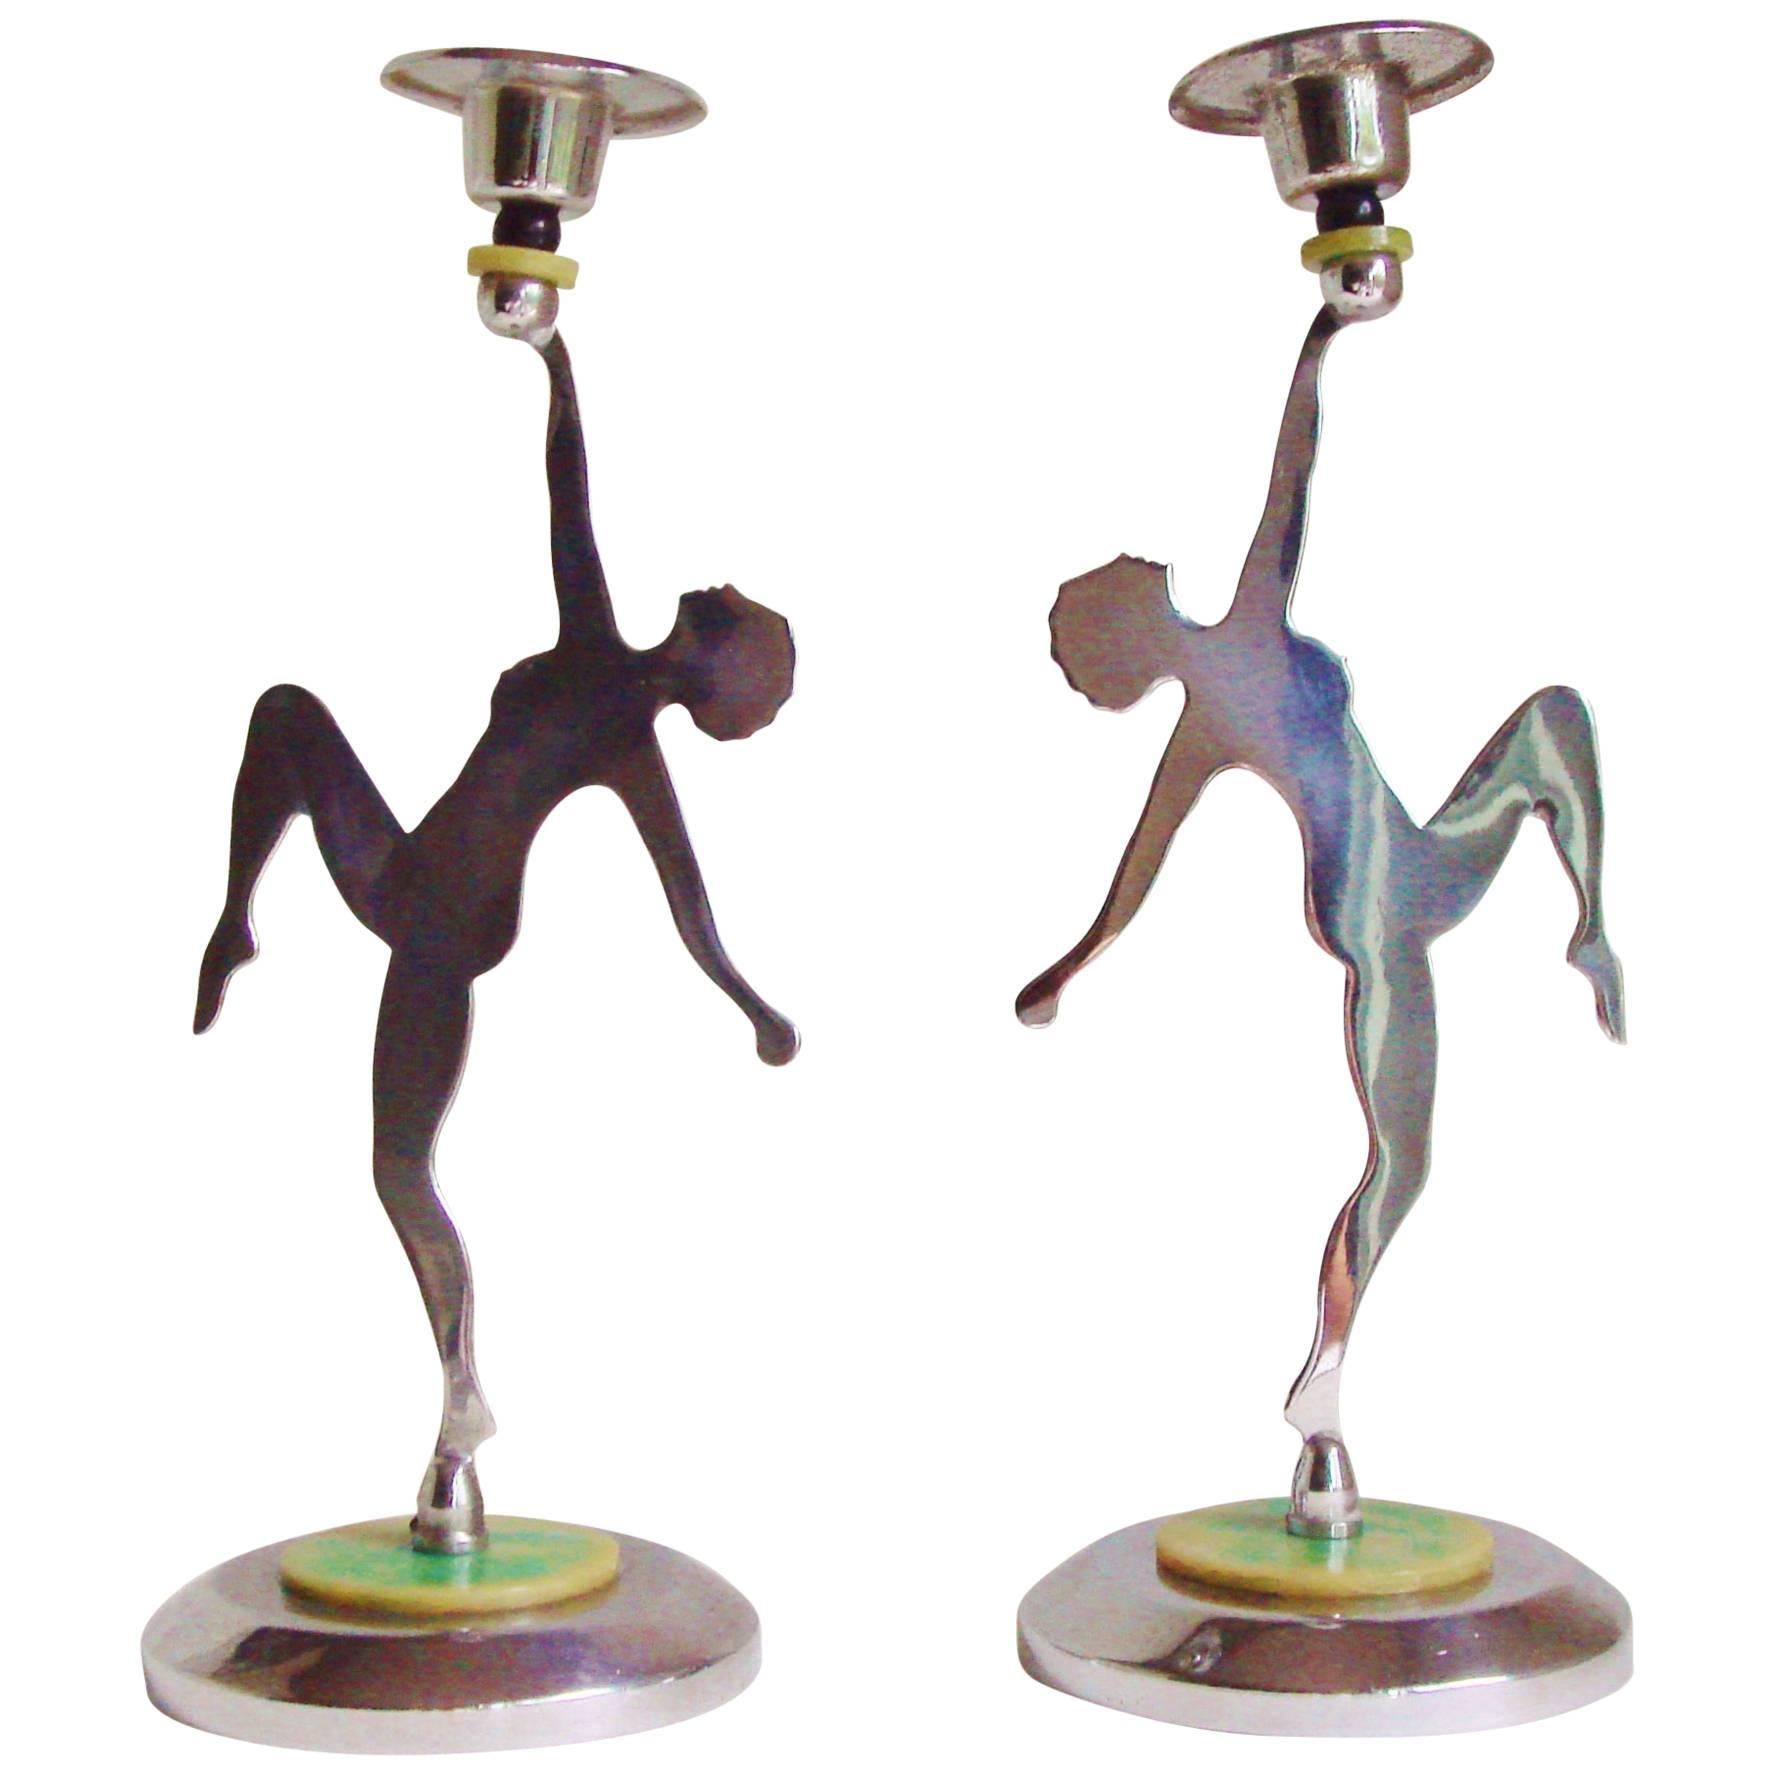 Pair of English Art Deco Chrome Figural Nude Candlesticks with Bakelite Accents For Sale